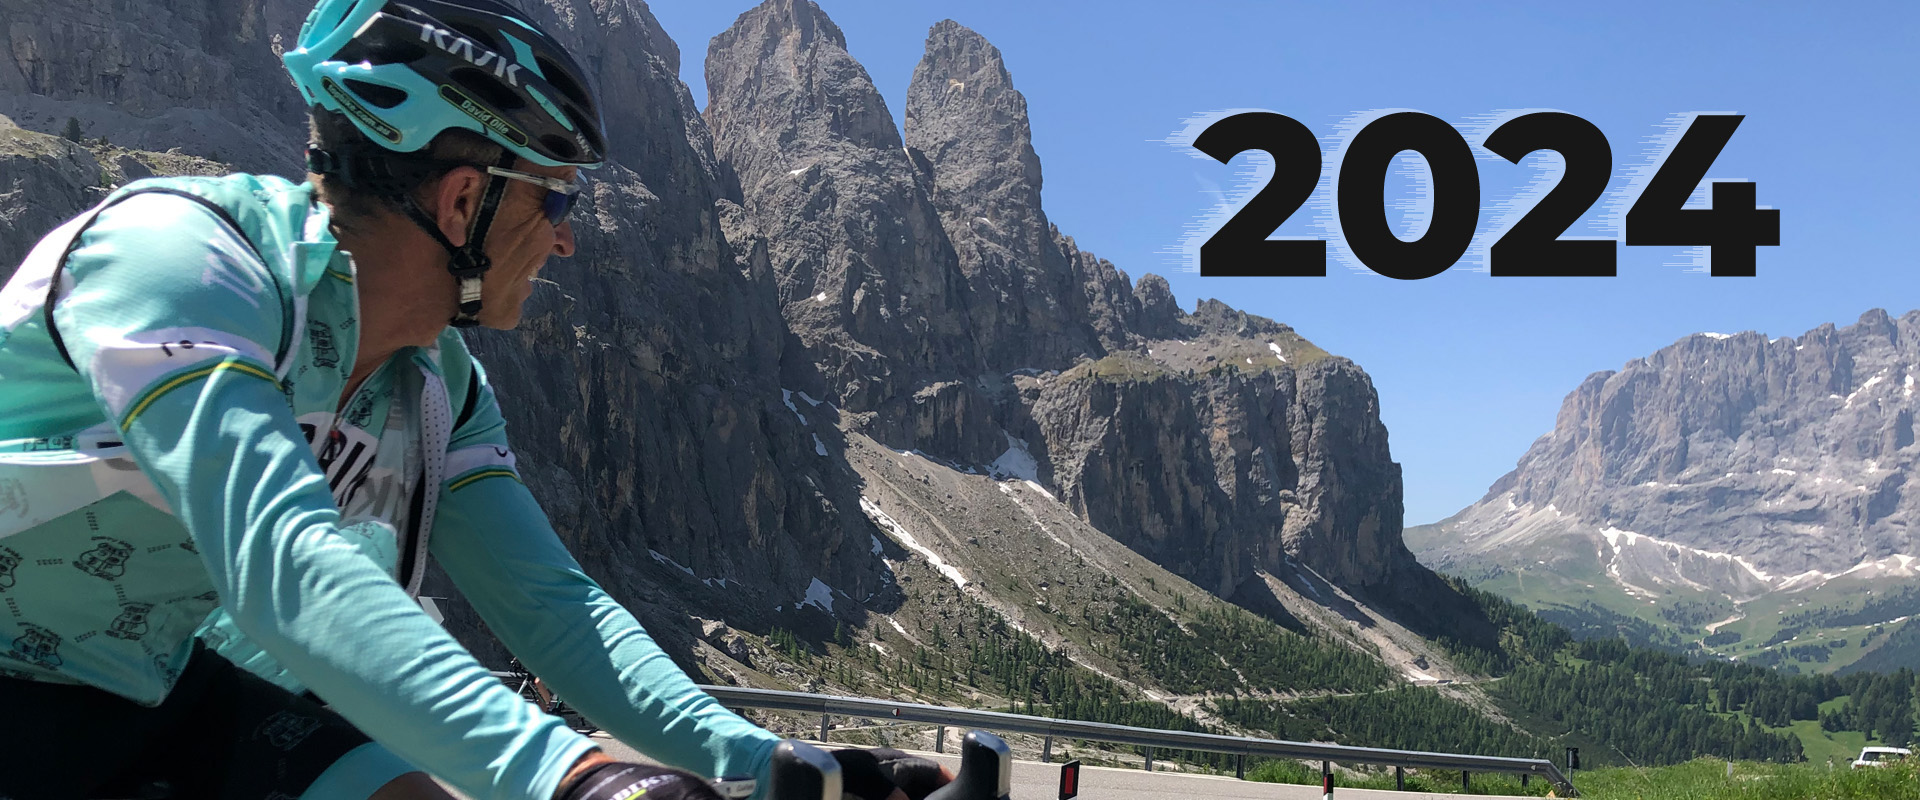 2024 Cycling Tours - Cycling in the Dolomites with David Olle, Topbike Tours